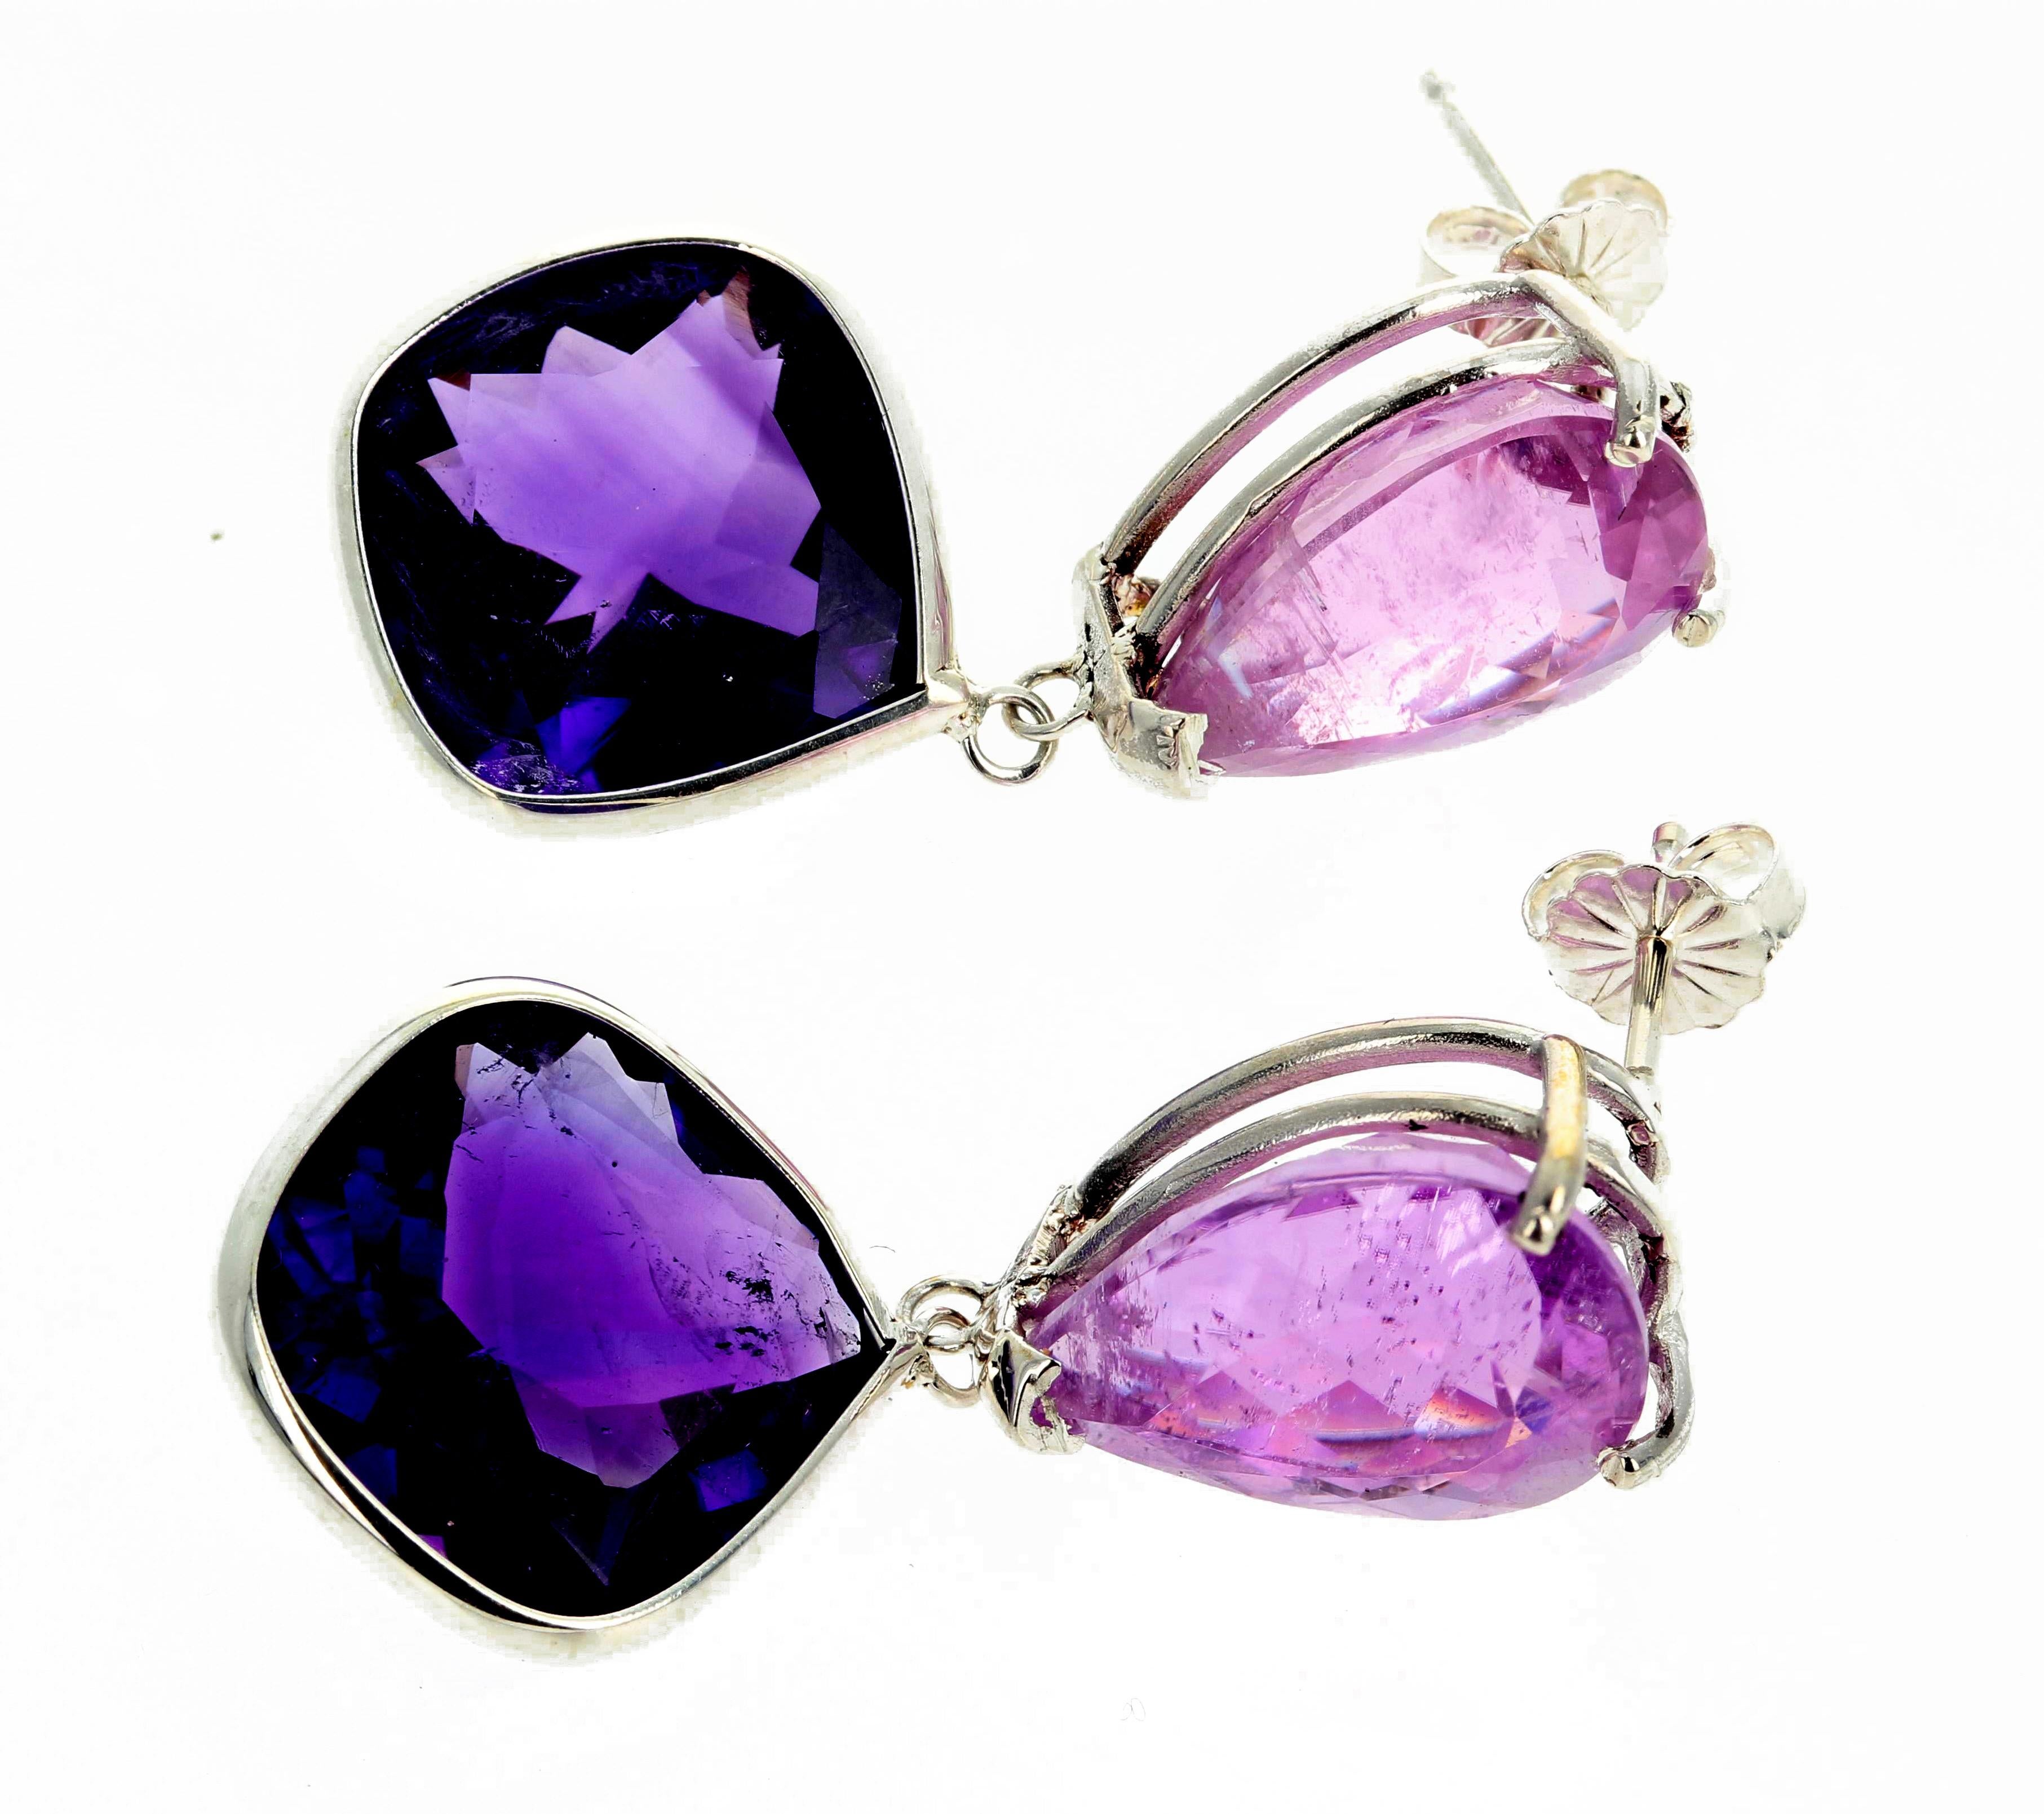 Beautiful 16.69 carats of tear drop Kunzites dangle glittering brilliant 15.30 carats of Amethysts with pinky sparkles set in sterling silver stud earrings that dangle approximately 1 1/2 inches long.  If you wish faster delivery on your purchase